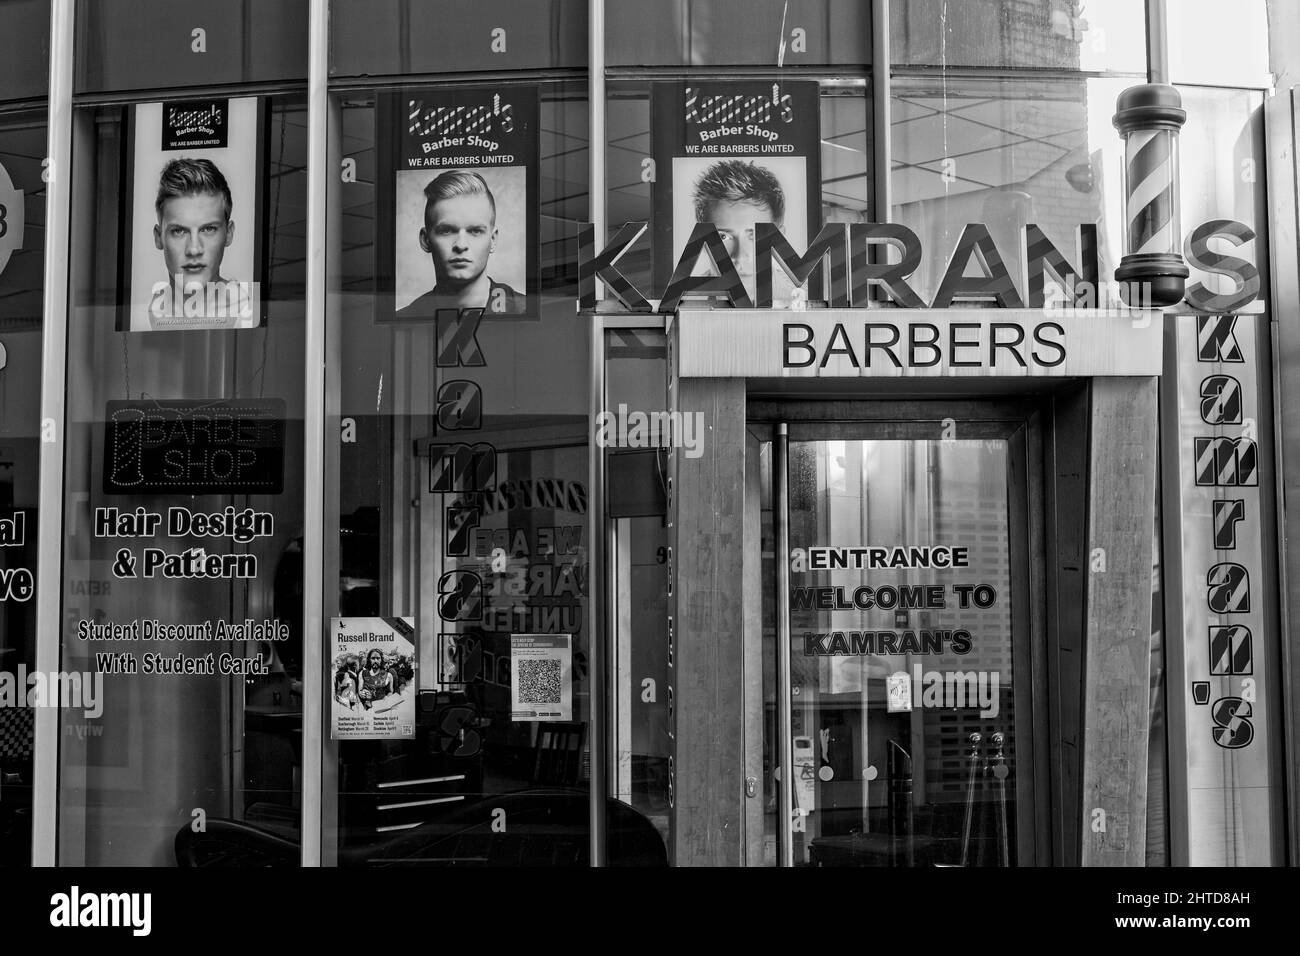 This glass fronted barber shop occupies retail space in the Haymarket Metro Station building in Newcastle's city centre. Stock Photo